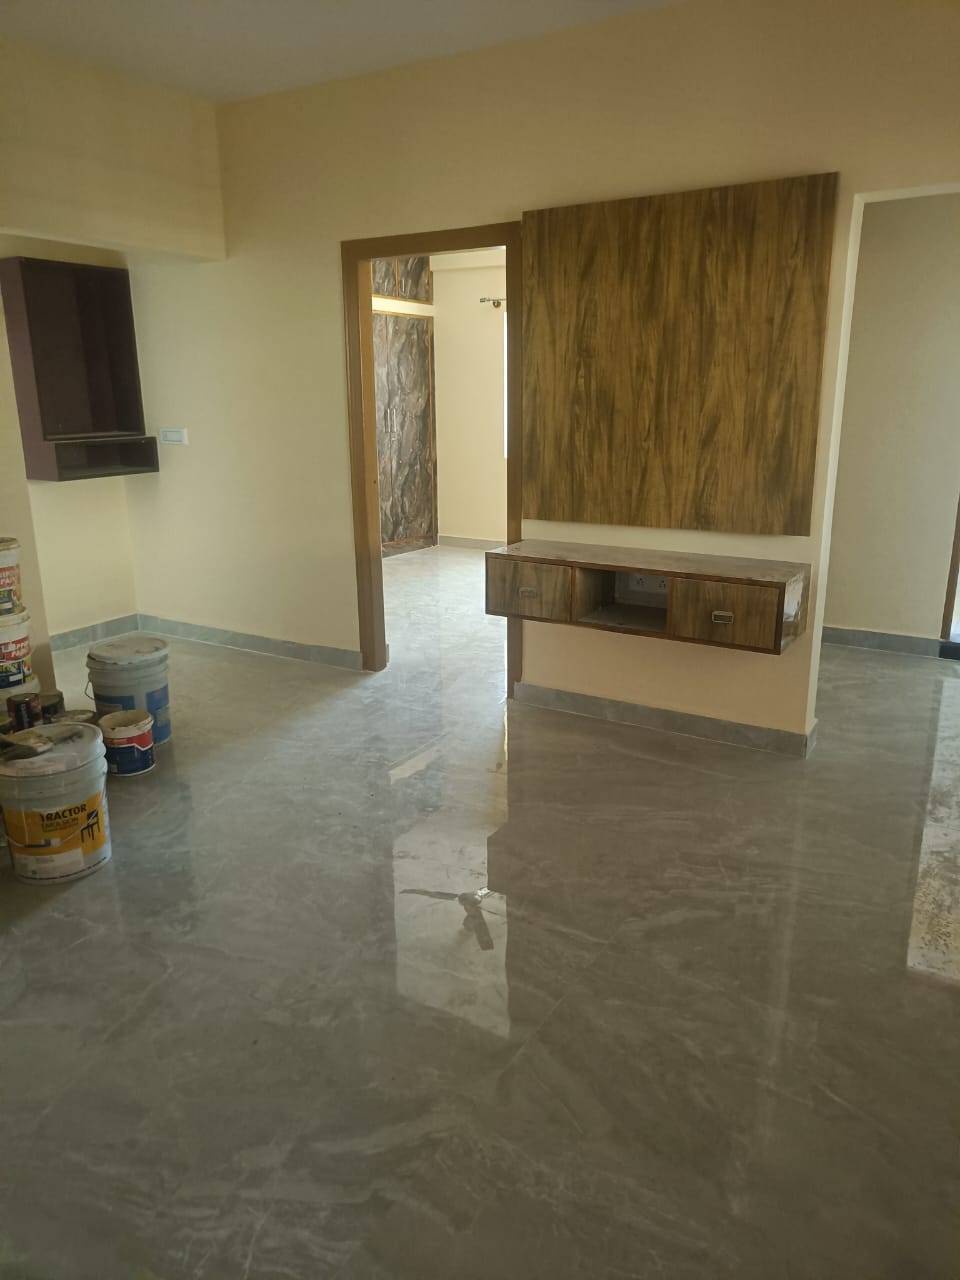 1 BHK Independent House for Lease Only at JAML2 - 4924-15lakh in Hebbal Kempapura